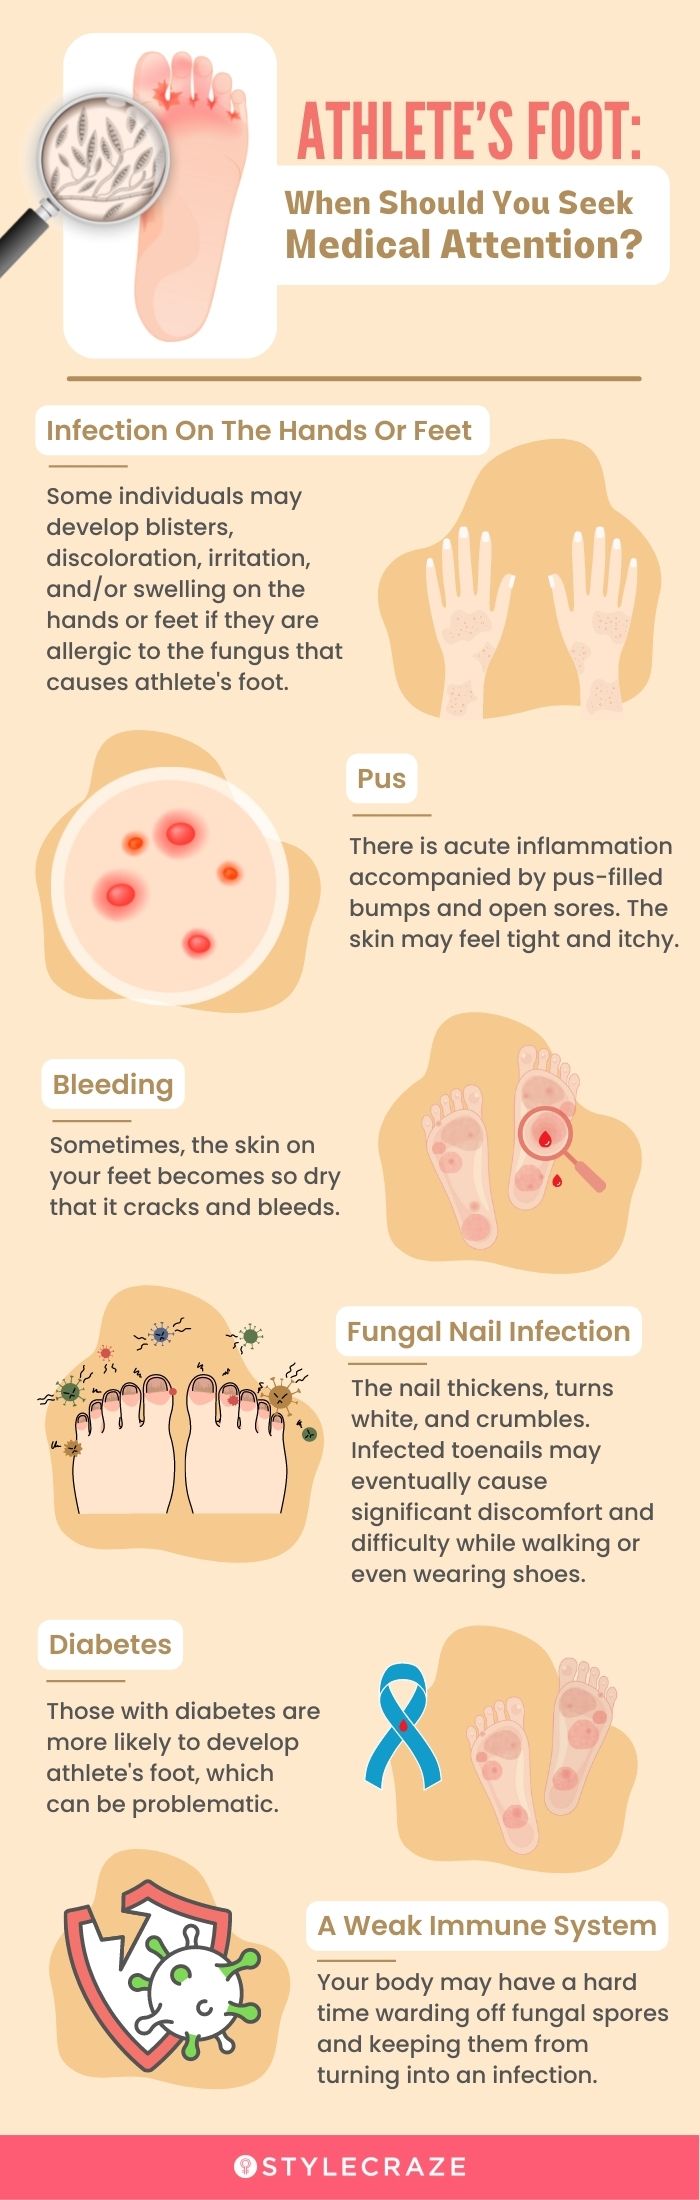 athlete’s foot when should you seek medical attention (infographic)